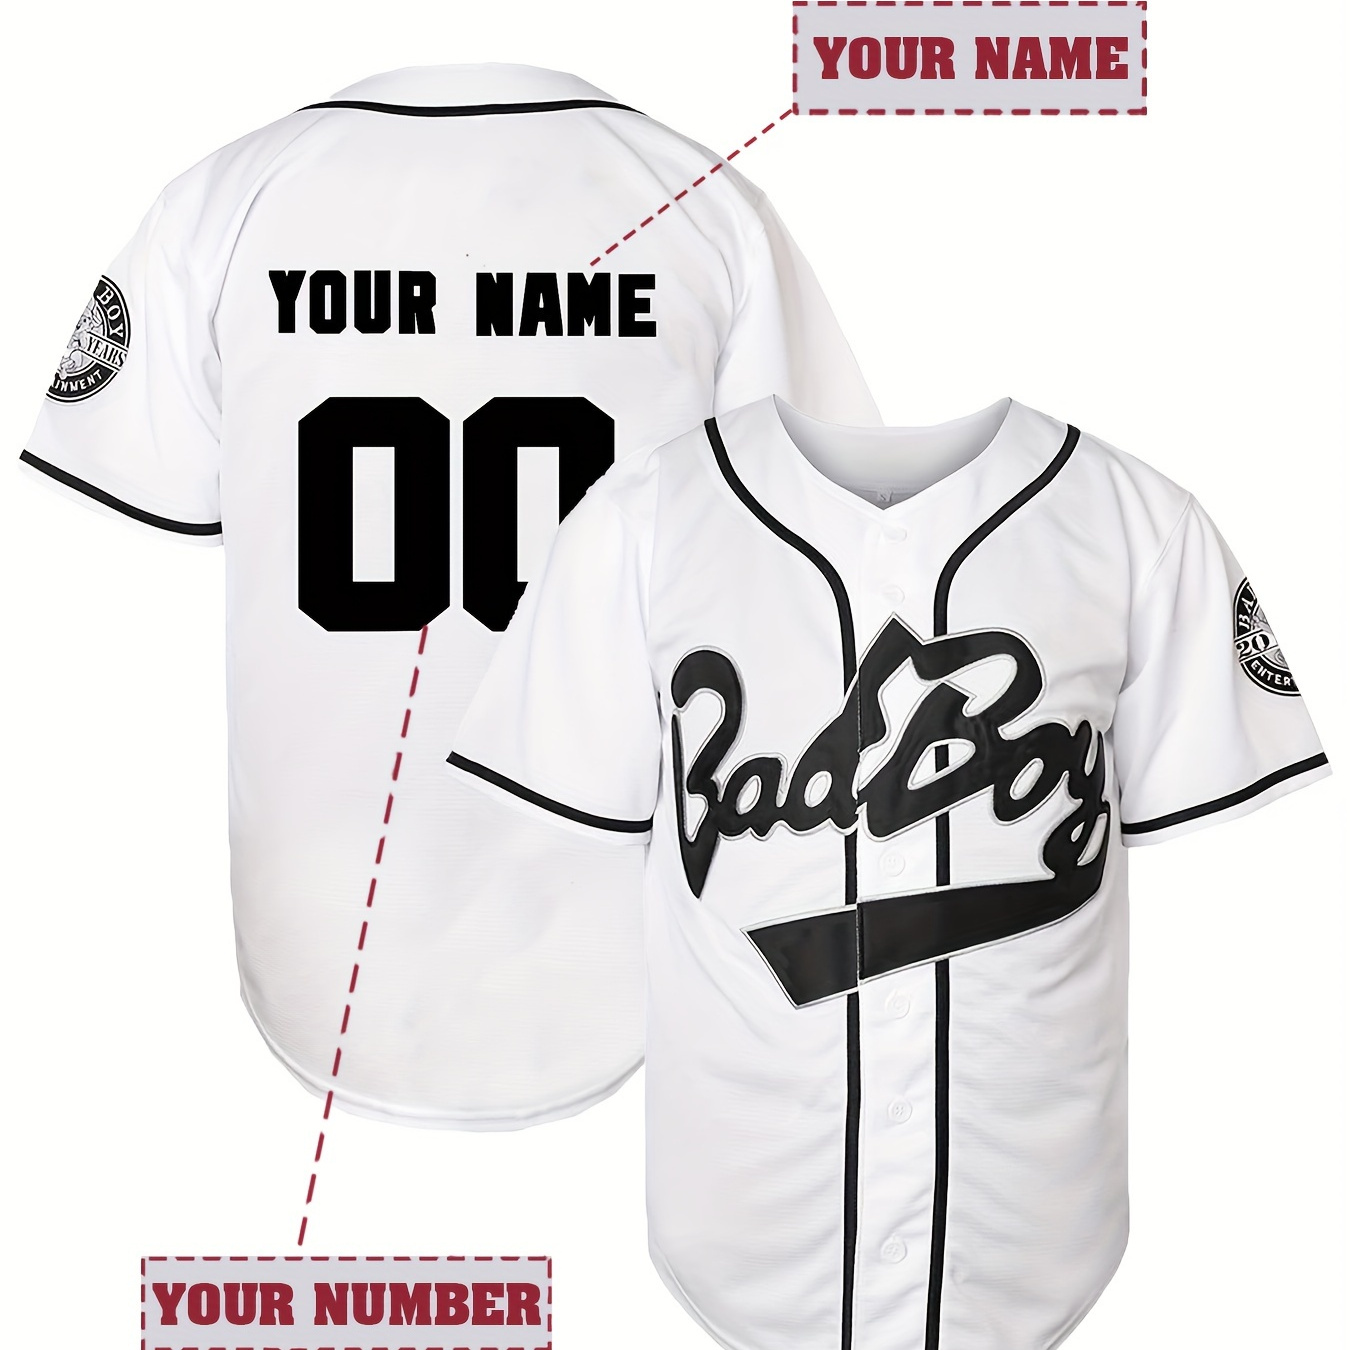 

Men's Personalized Custom Baseball Jersey Shirt, Name And Number Design, Men's Short Sleeve Loose Breathable V-neck Embroidery Baseball Jersey, Sports Shirt For Team Training